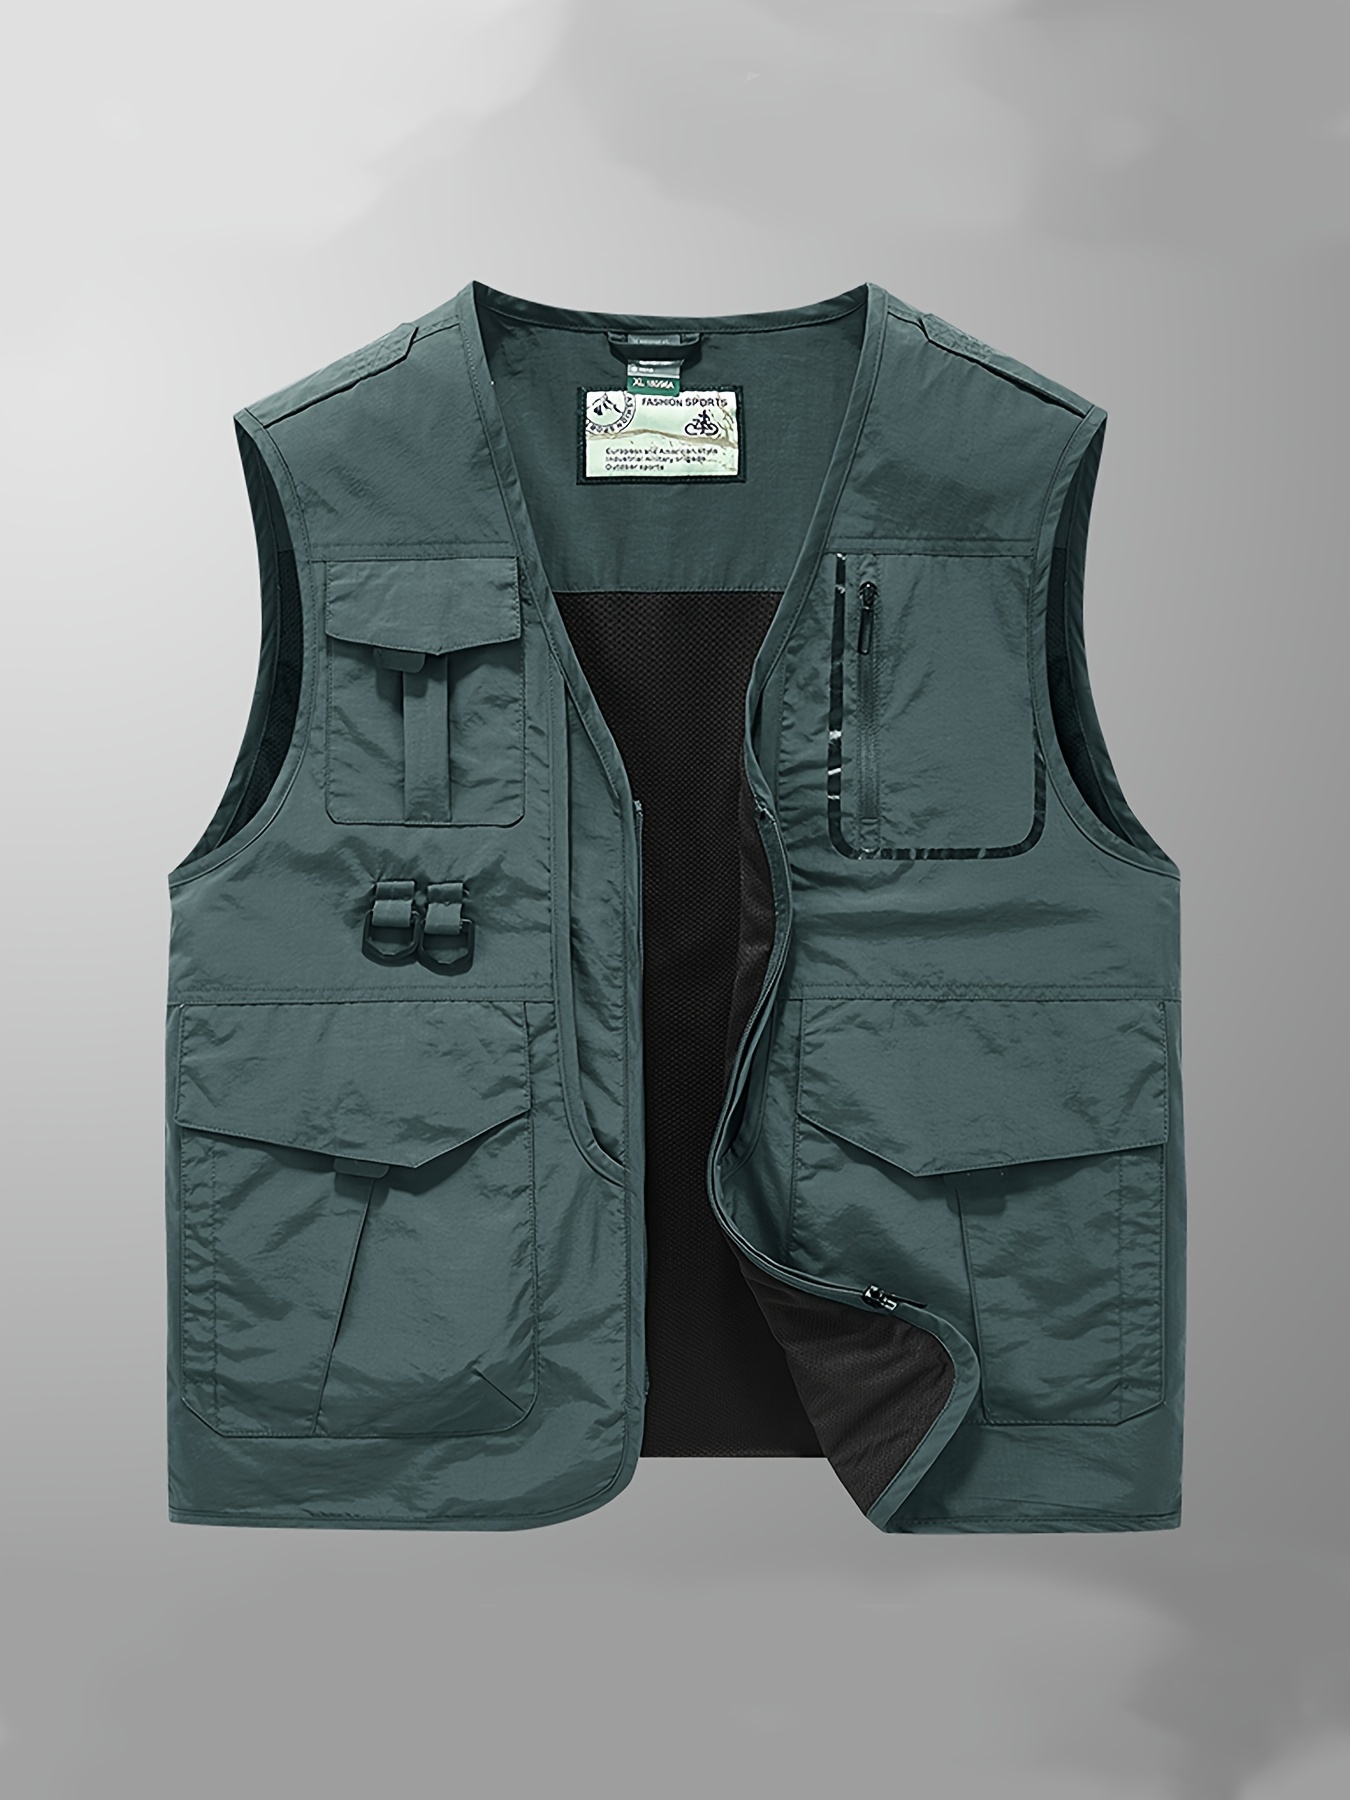 multi pocket vest kids, multi pocket vest kids Suppliers and